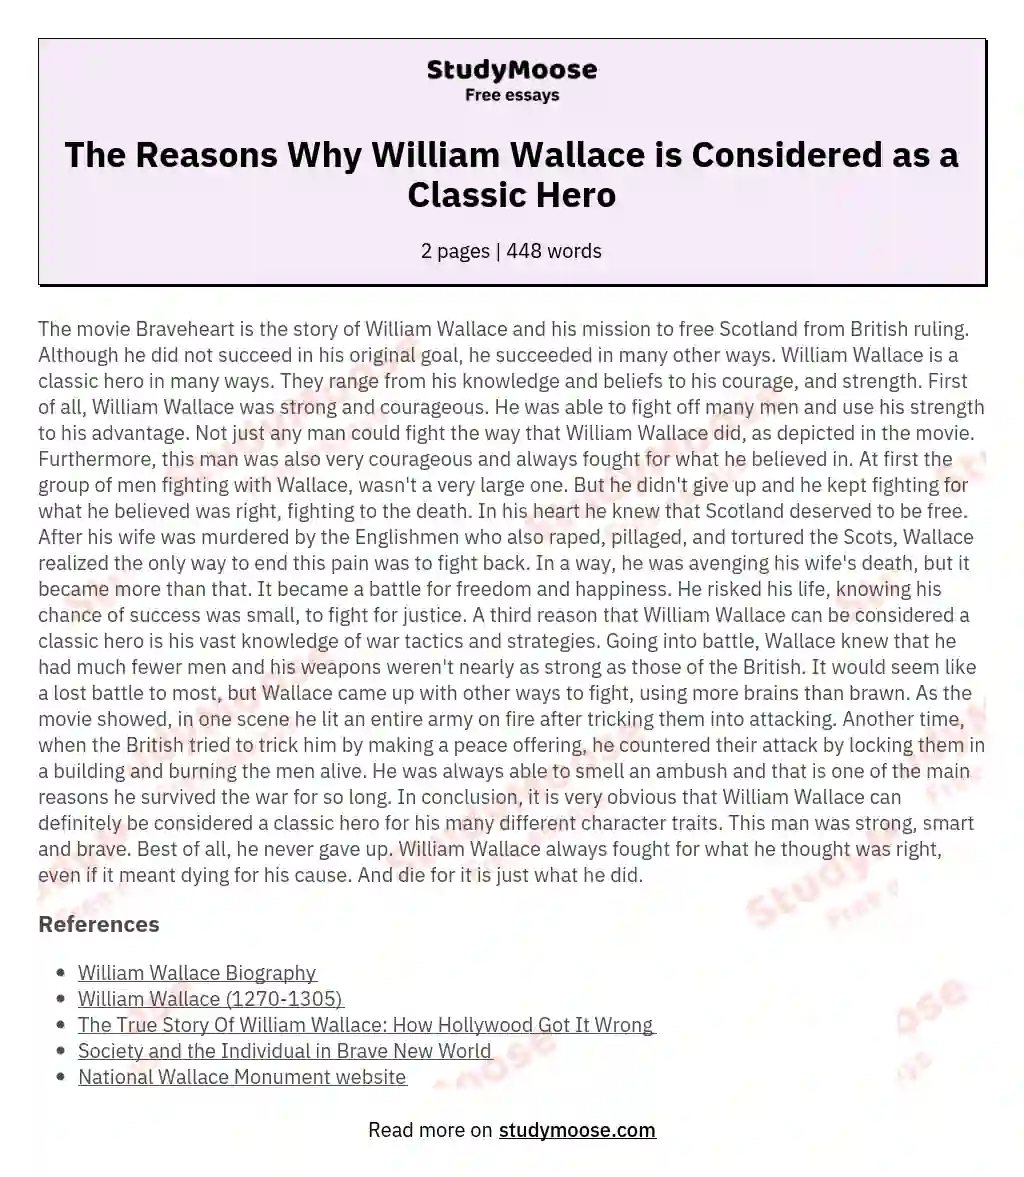 The Reasons Why William Wallace is Considered as a Classic Hero essay